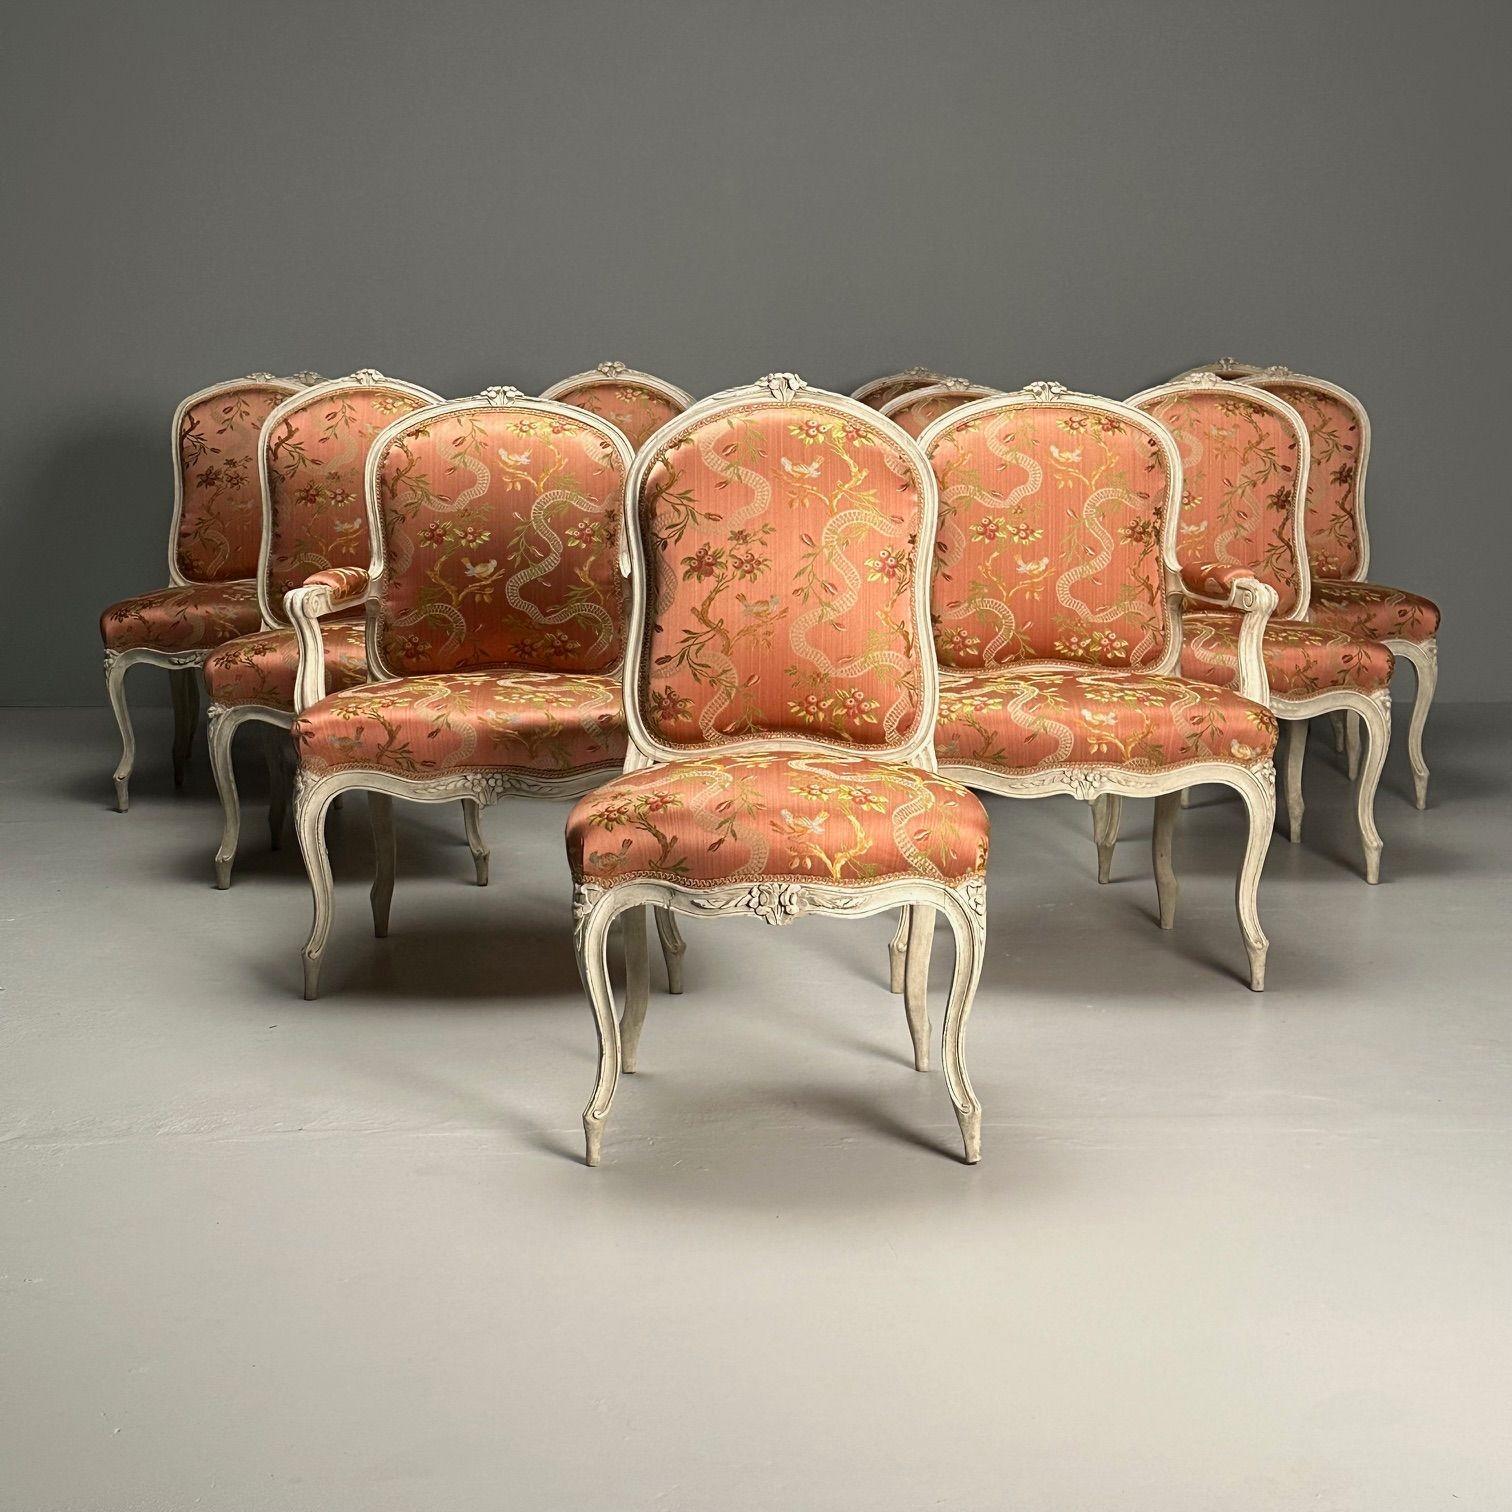 14 Louis XV Dining Chairs by Jean Baptist Cresson, 18th Century, France, Painted, Scalamandre Upholstery
One of a kind set of stunning dining chairs. Each having curvaceous form crest rails finely carved with flowers above a molded chair back that